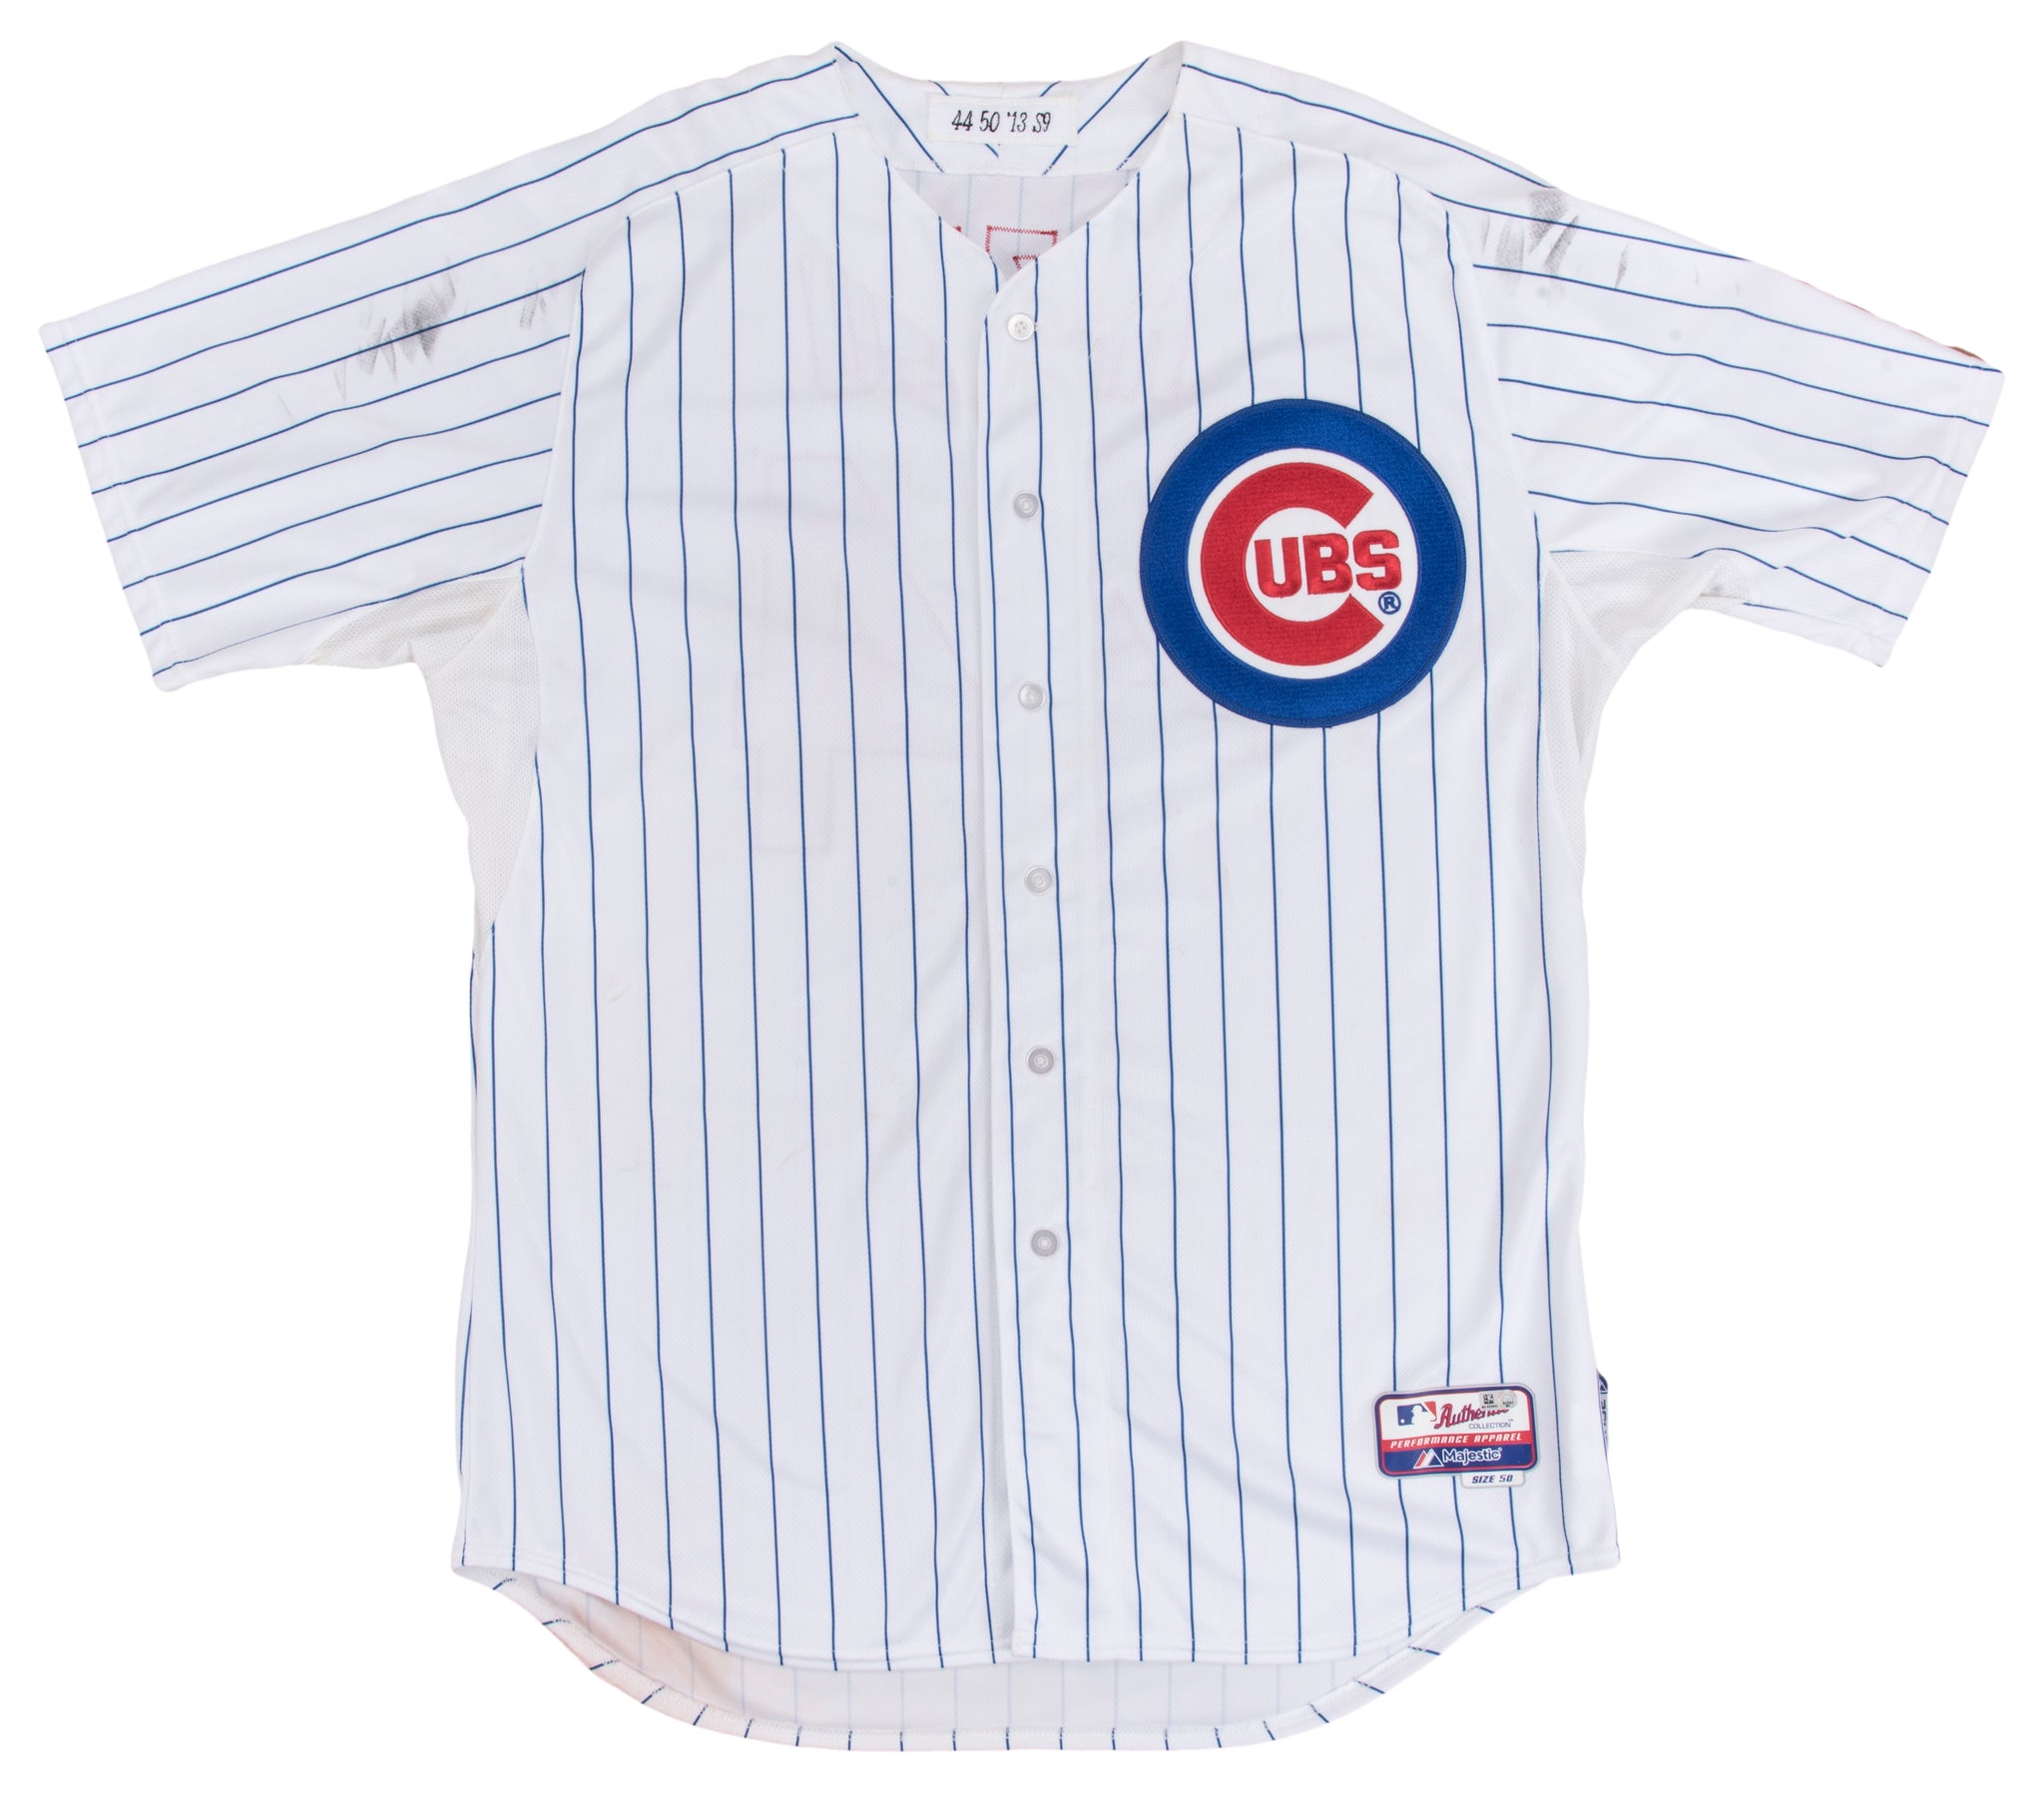 Anthony Rizzo official Cubs home pinstripe jersey from Majestic